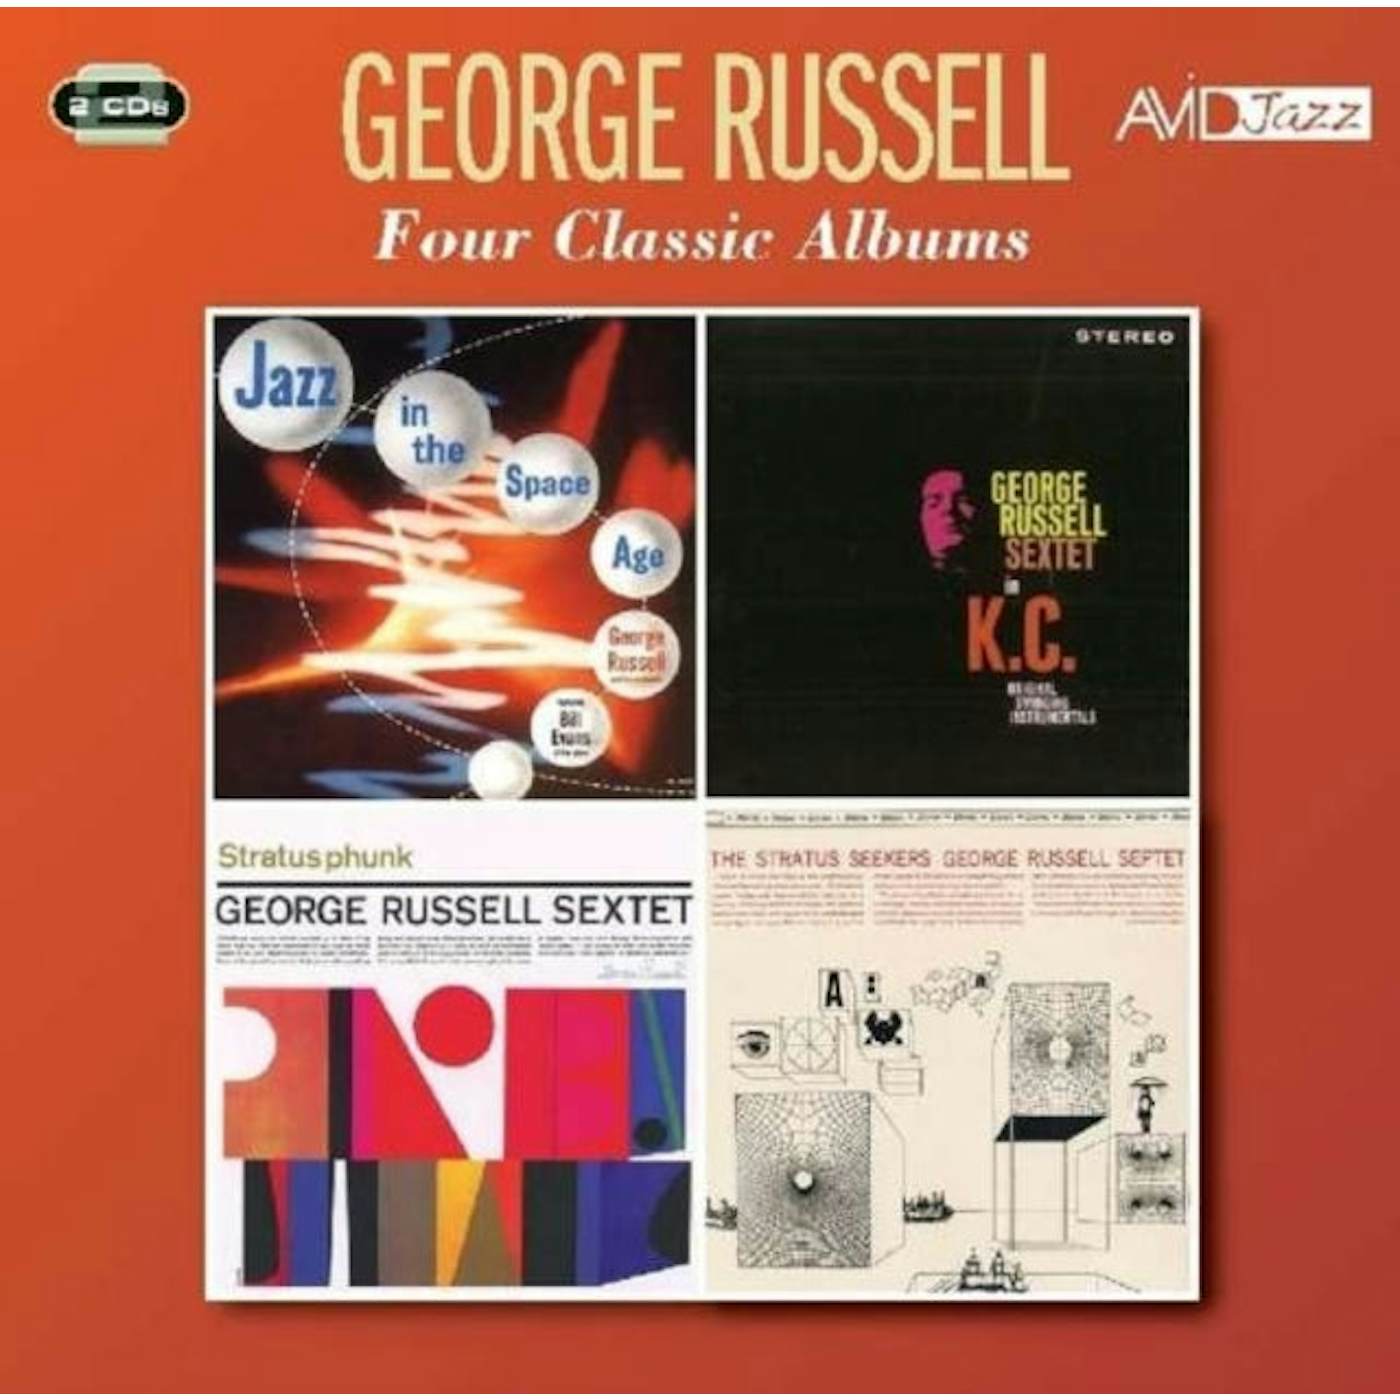 George Russell CD - Four Classic Albums (Jazz In The Space Age / George Russell Sextet In K.C. / Stratusphunk / The Stratus Seekers)